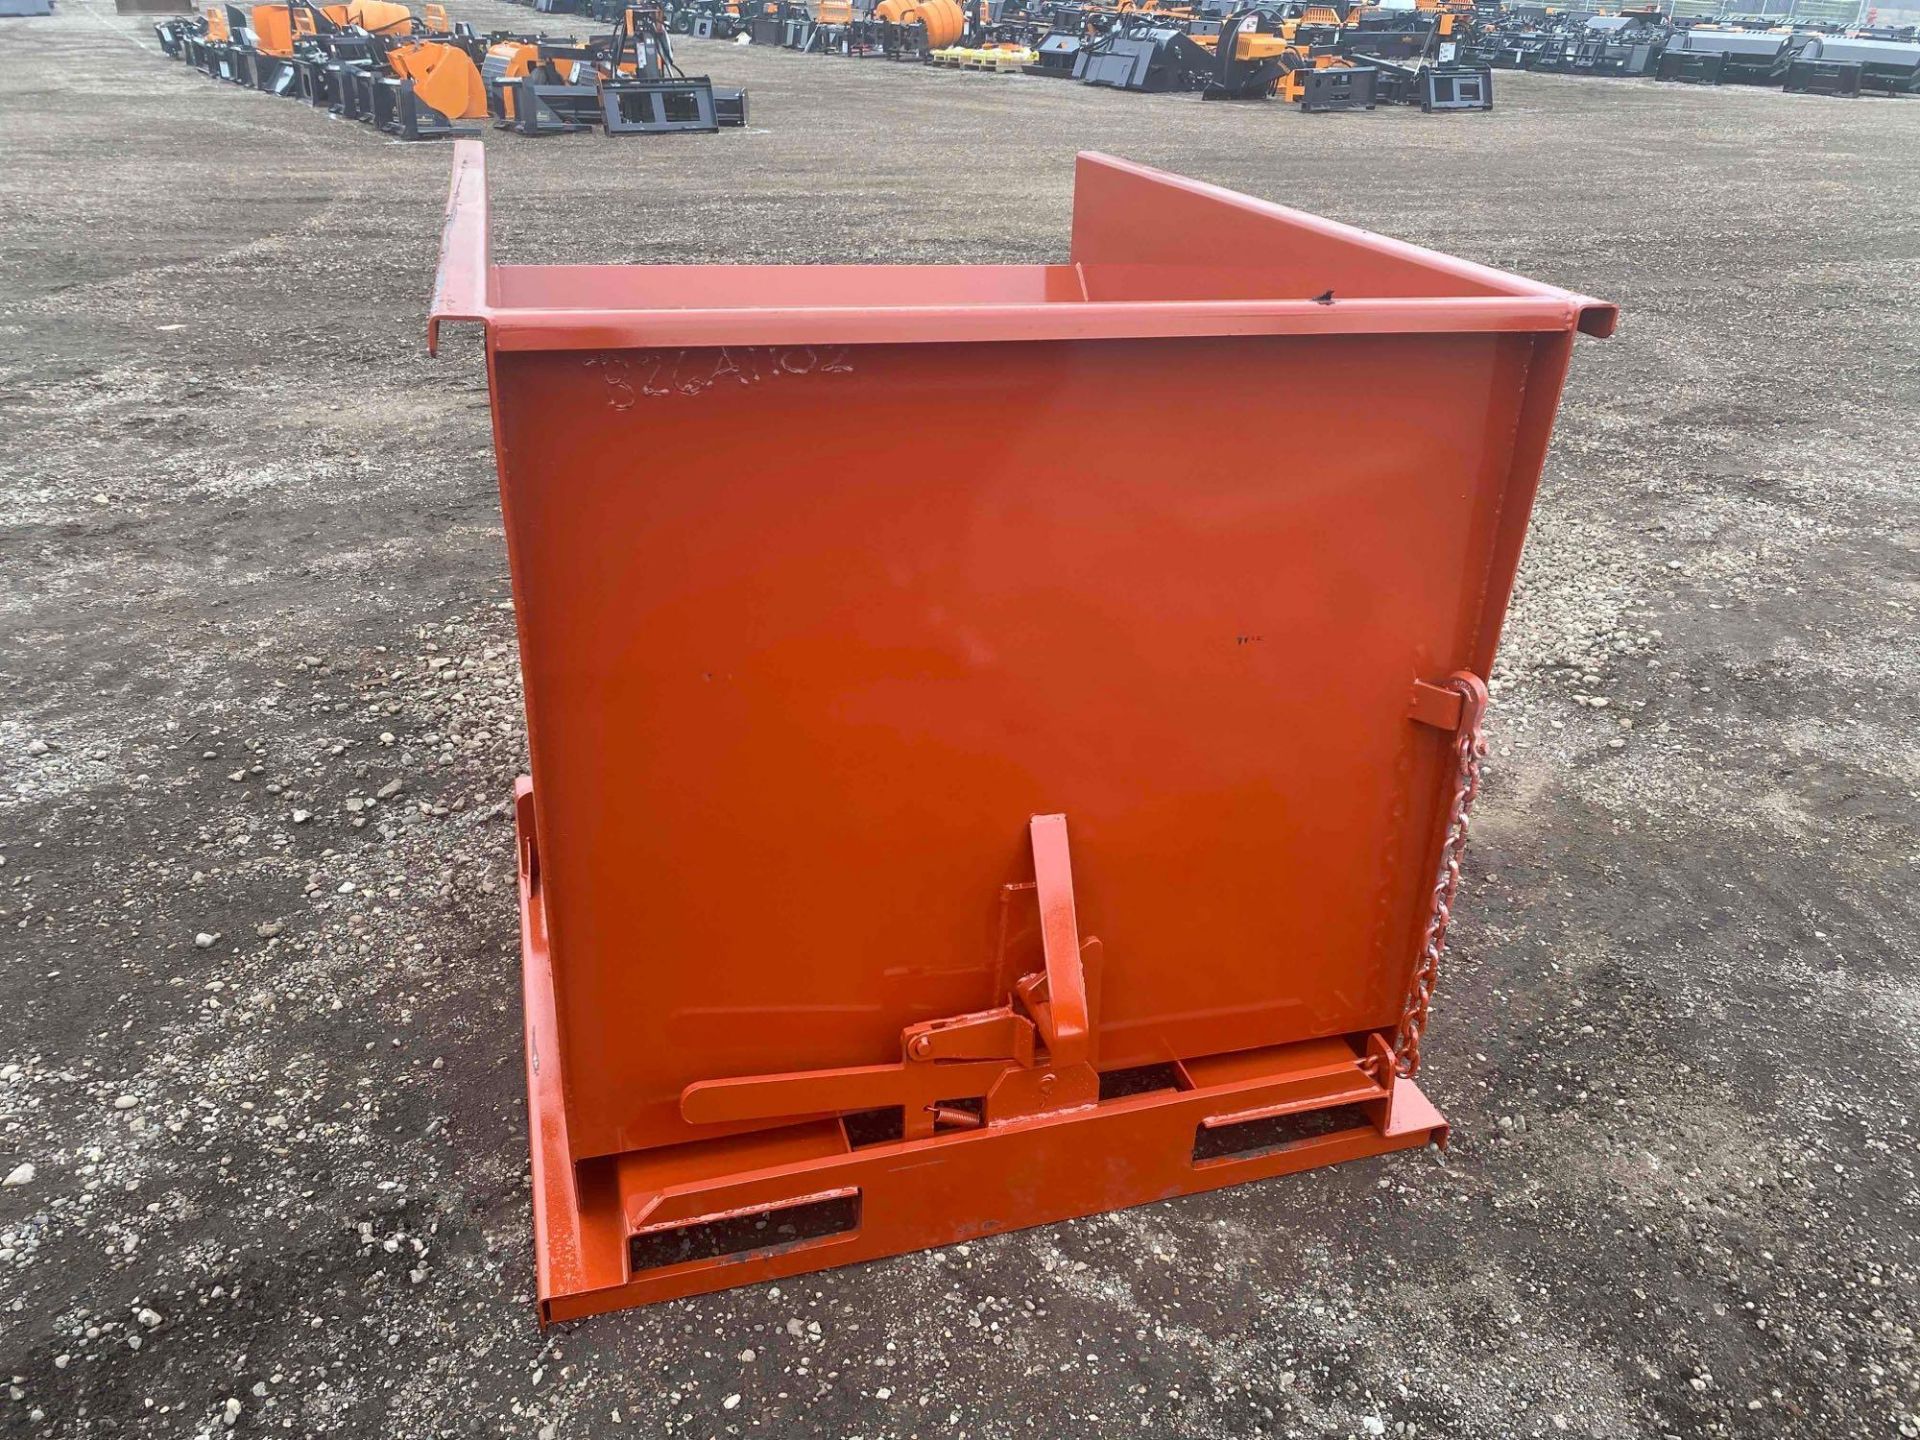 New 2 Cubic Yard Self Dumping Hopper with Fork Pockets - Image 2 of 6